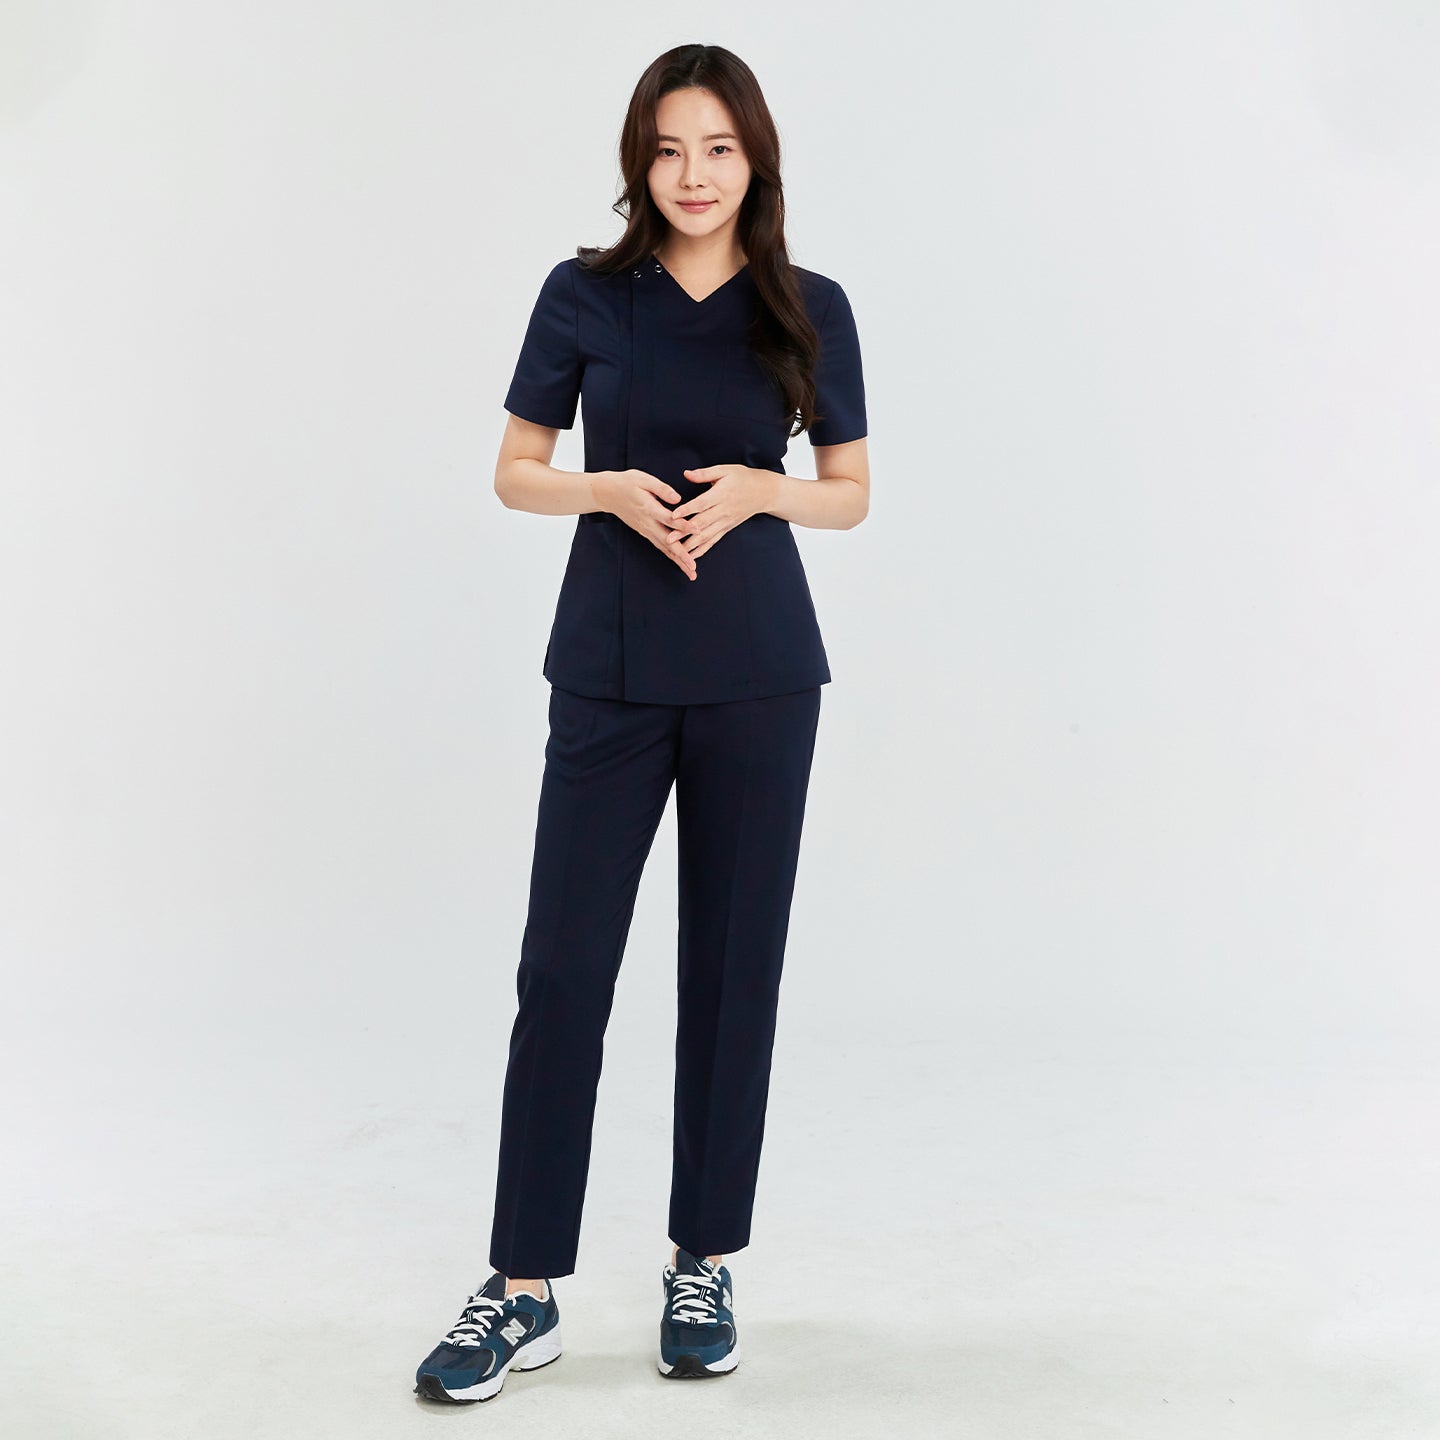 Woman in a navy front zipper scrub top and straight-leg pants, standing with hands clasped, wearing navy sneakers,Navy